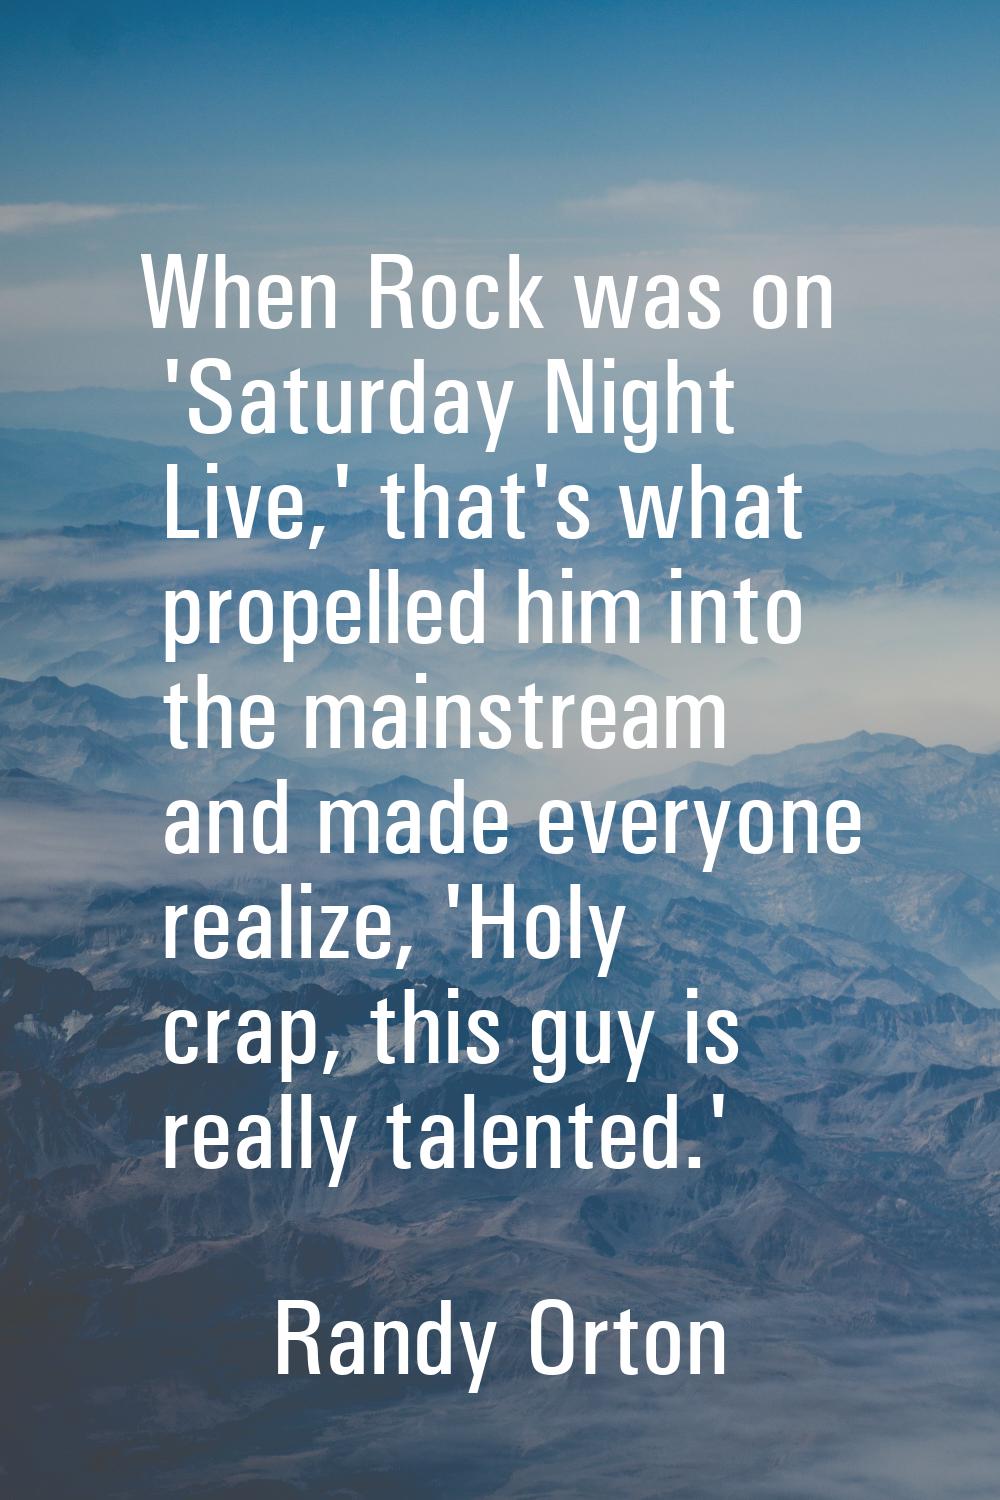 When Rock was on 'Saturday Night Live,' that's what propelled him into the mainstream and made ever